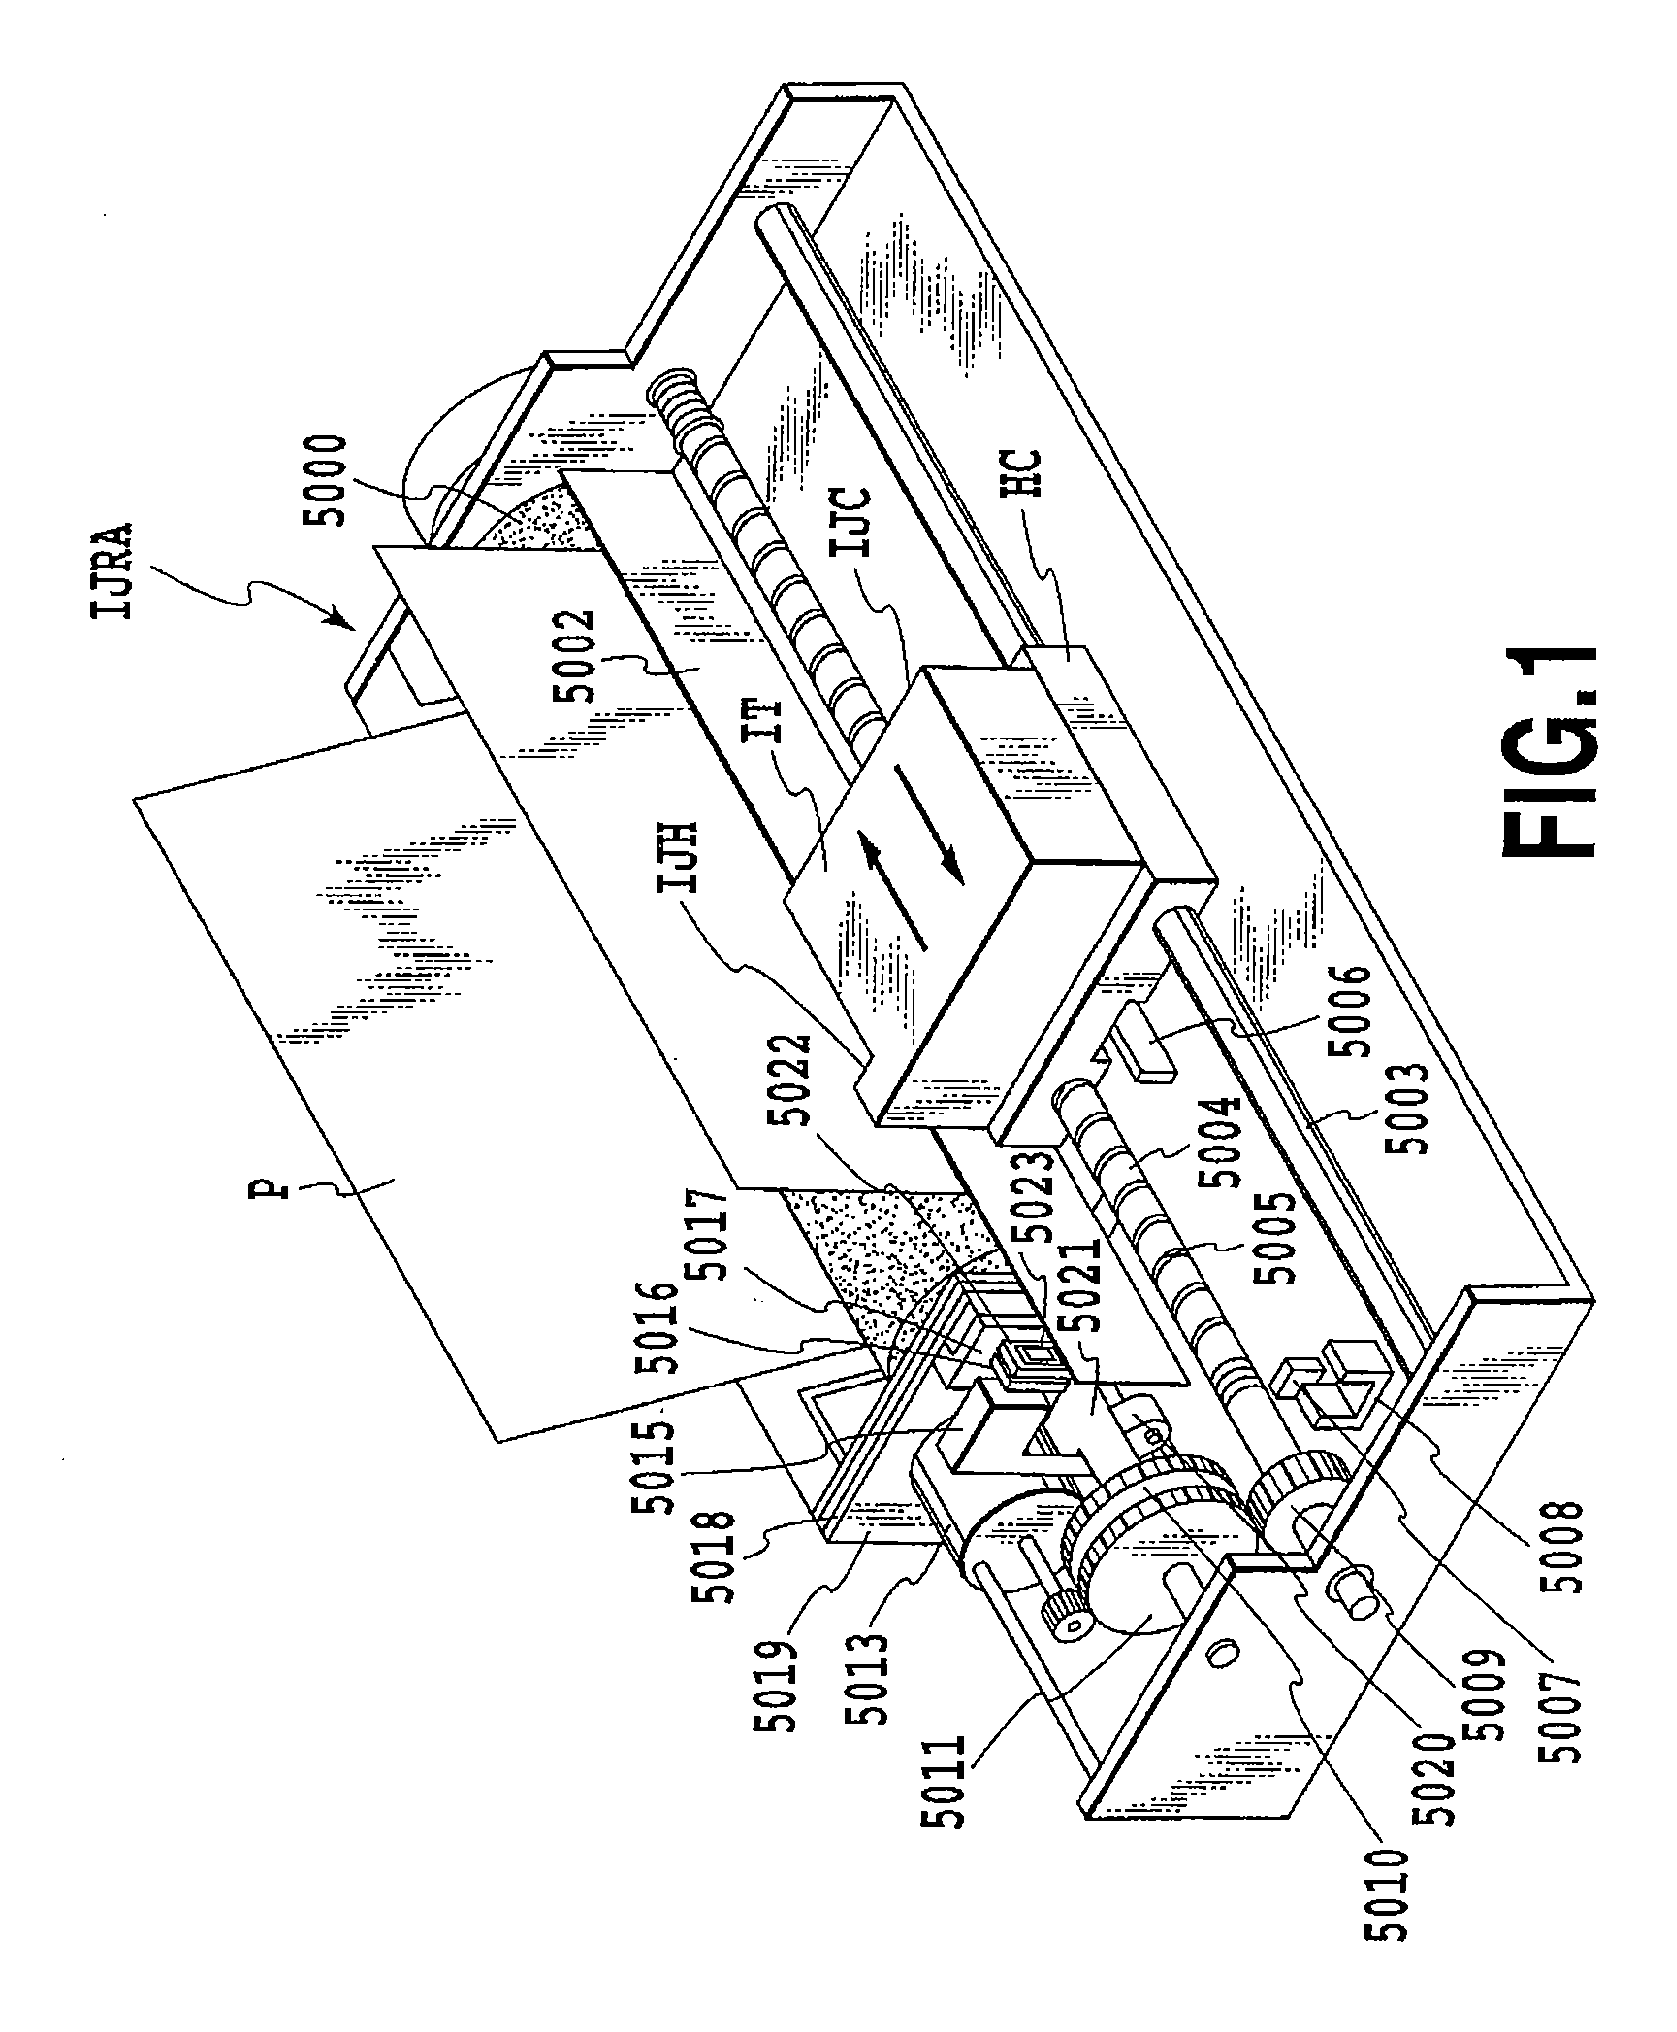 Ink jet recording head and ink jet recording apparatus